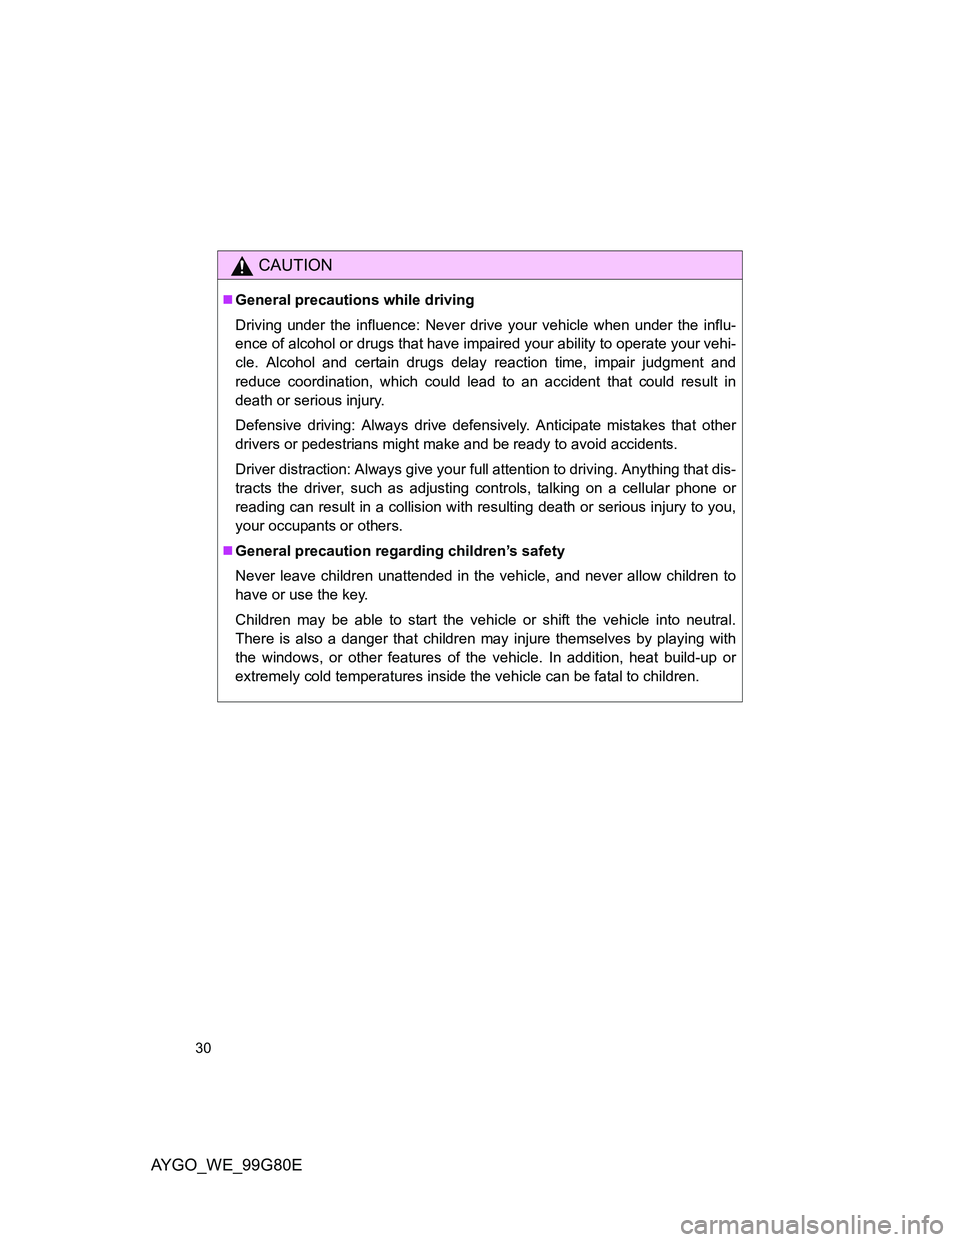 TOYOTA AYGO 2014  Owners Manual (in English) AYGO_WE_99G80E
30
CAUTION
General precautions while driving
Driving under the influence: Never drive your vehicle when under the influ-
ence of alcohol or drugs that have impaired your ability to o